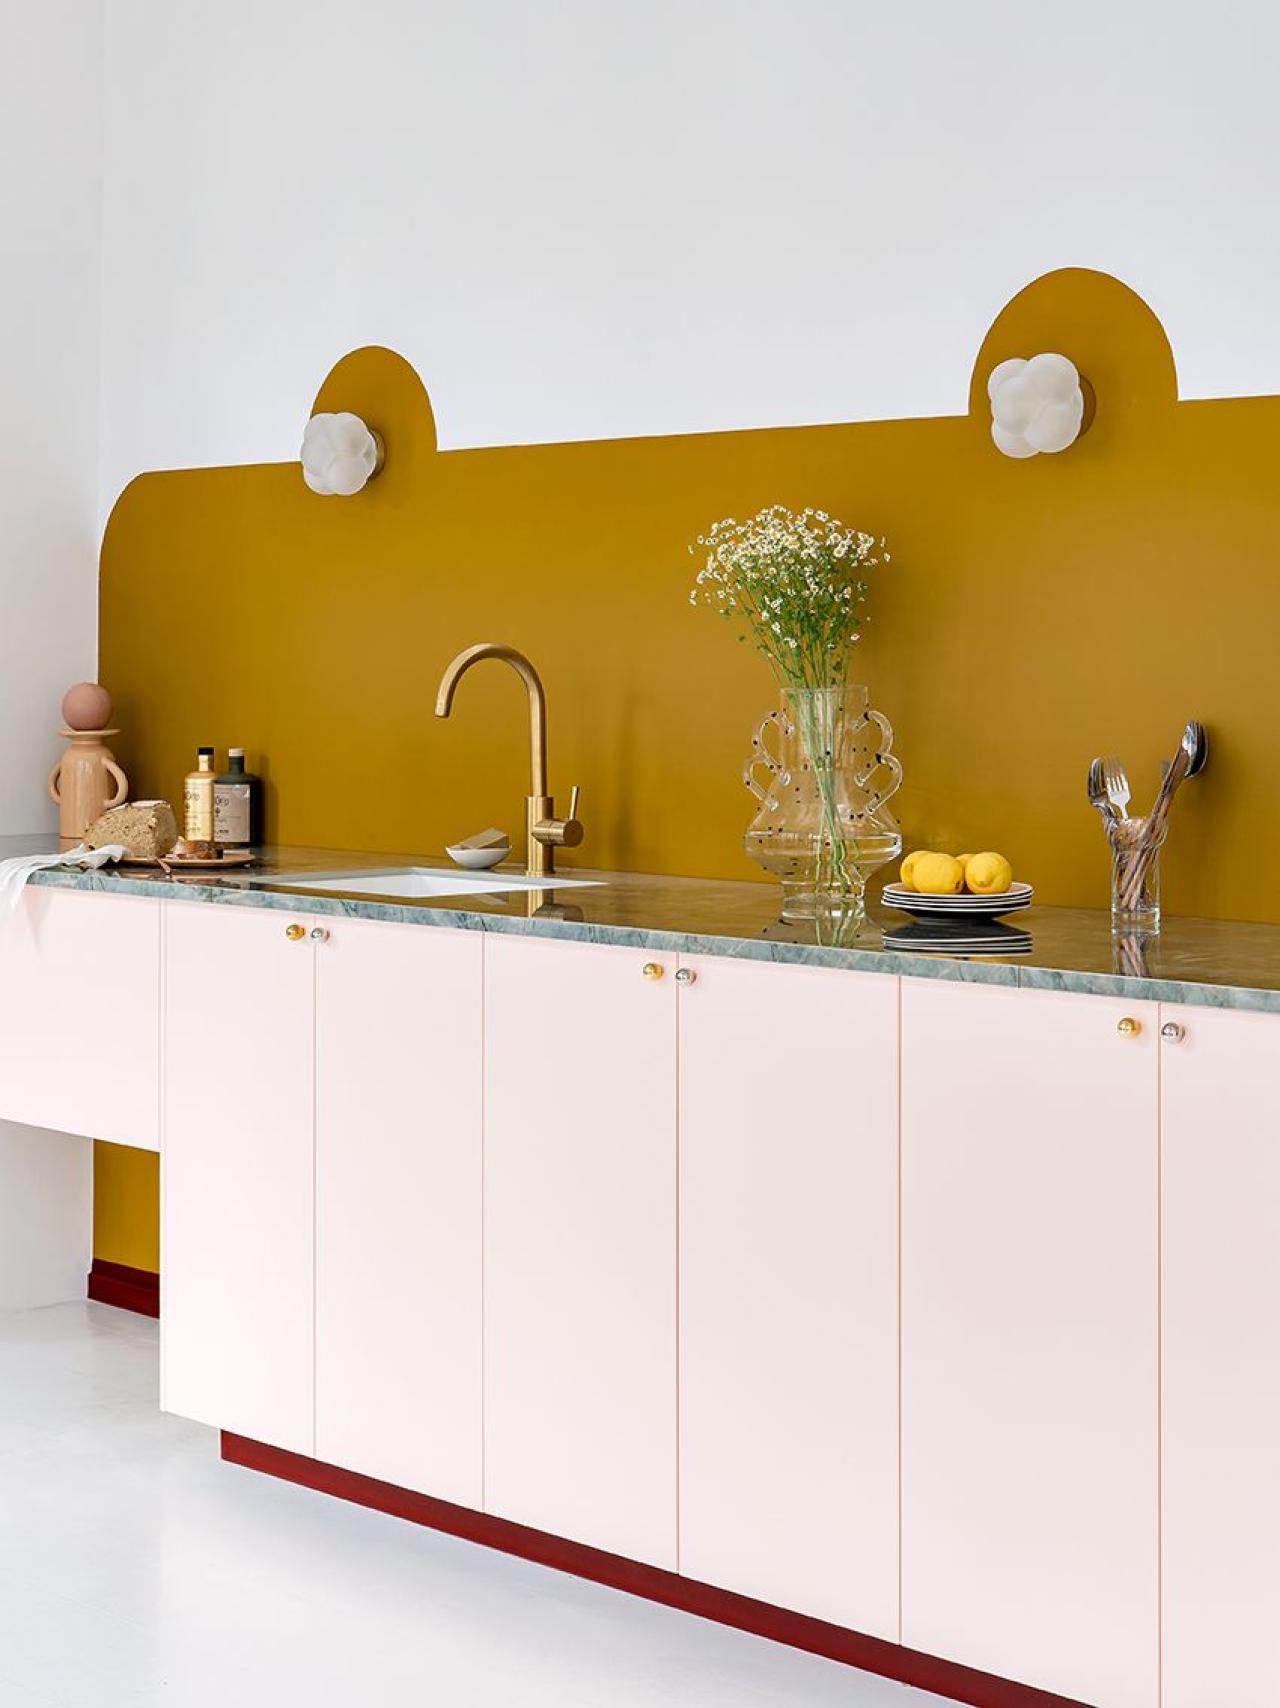 A Rose calcaire kitchen created by Margaux Keller. 